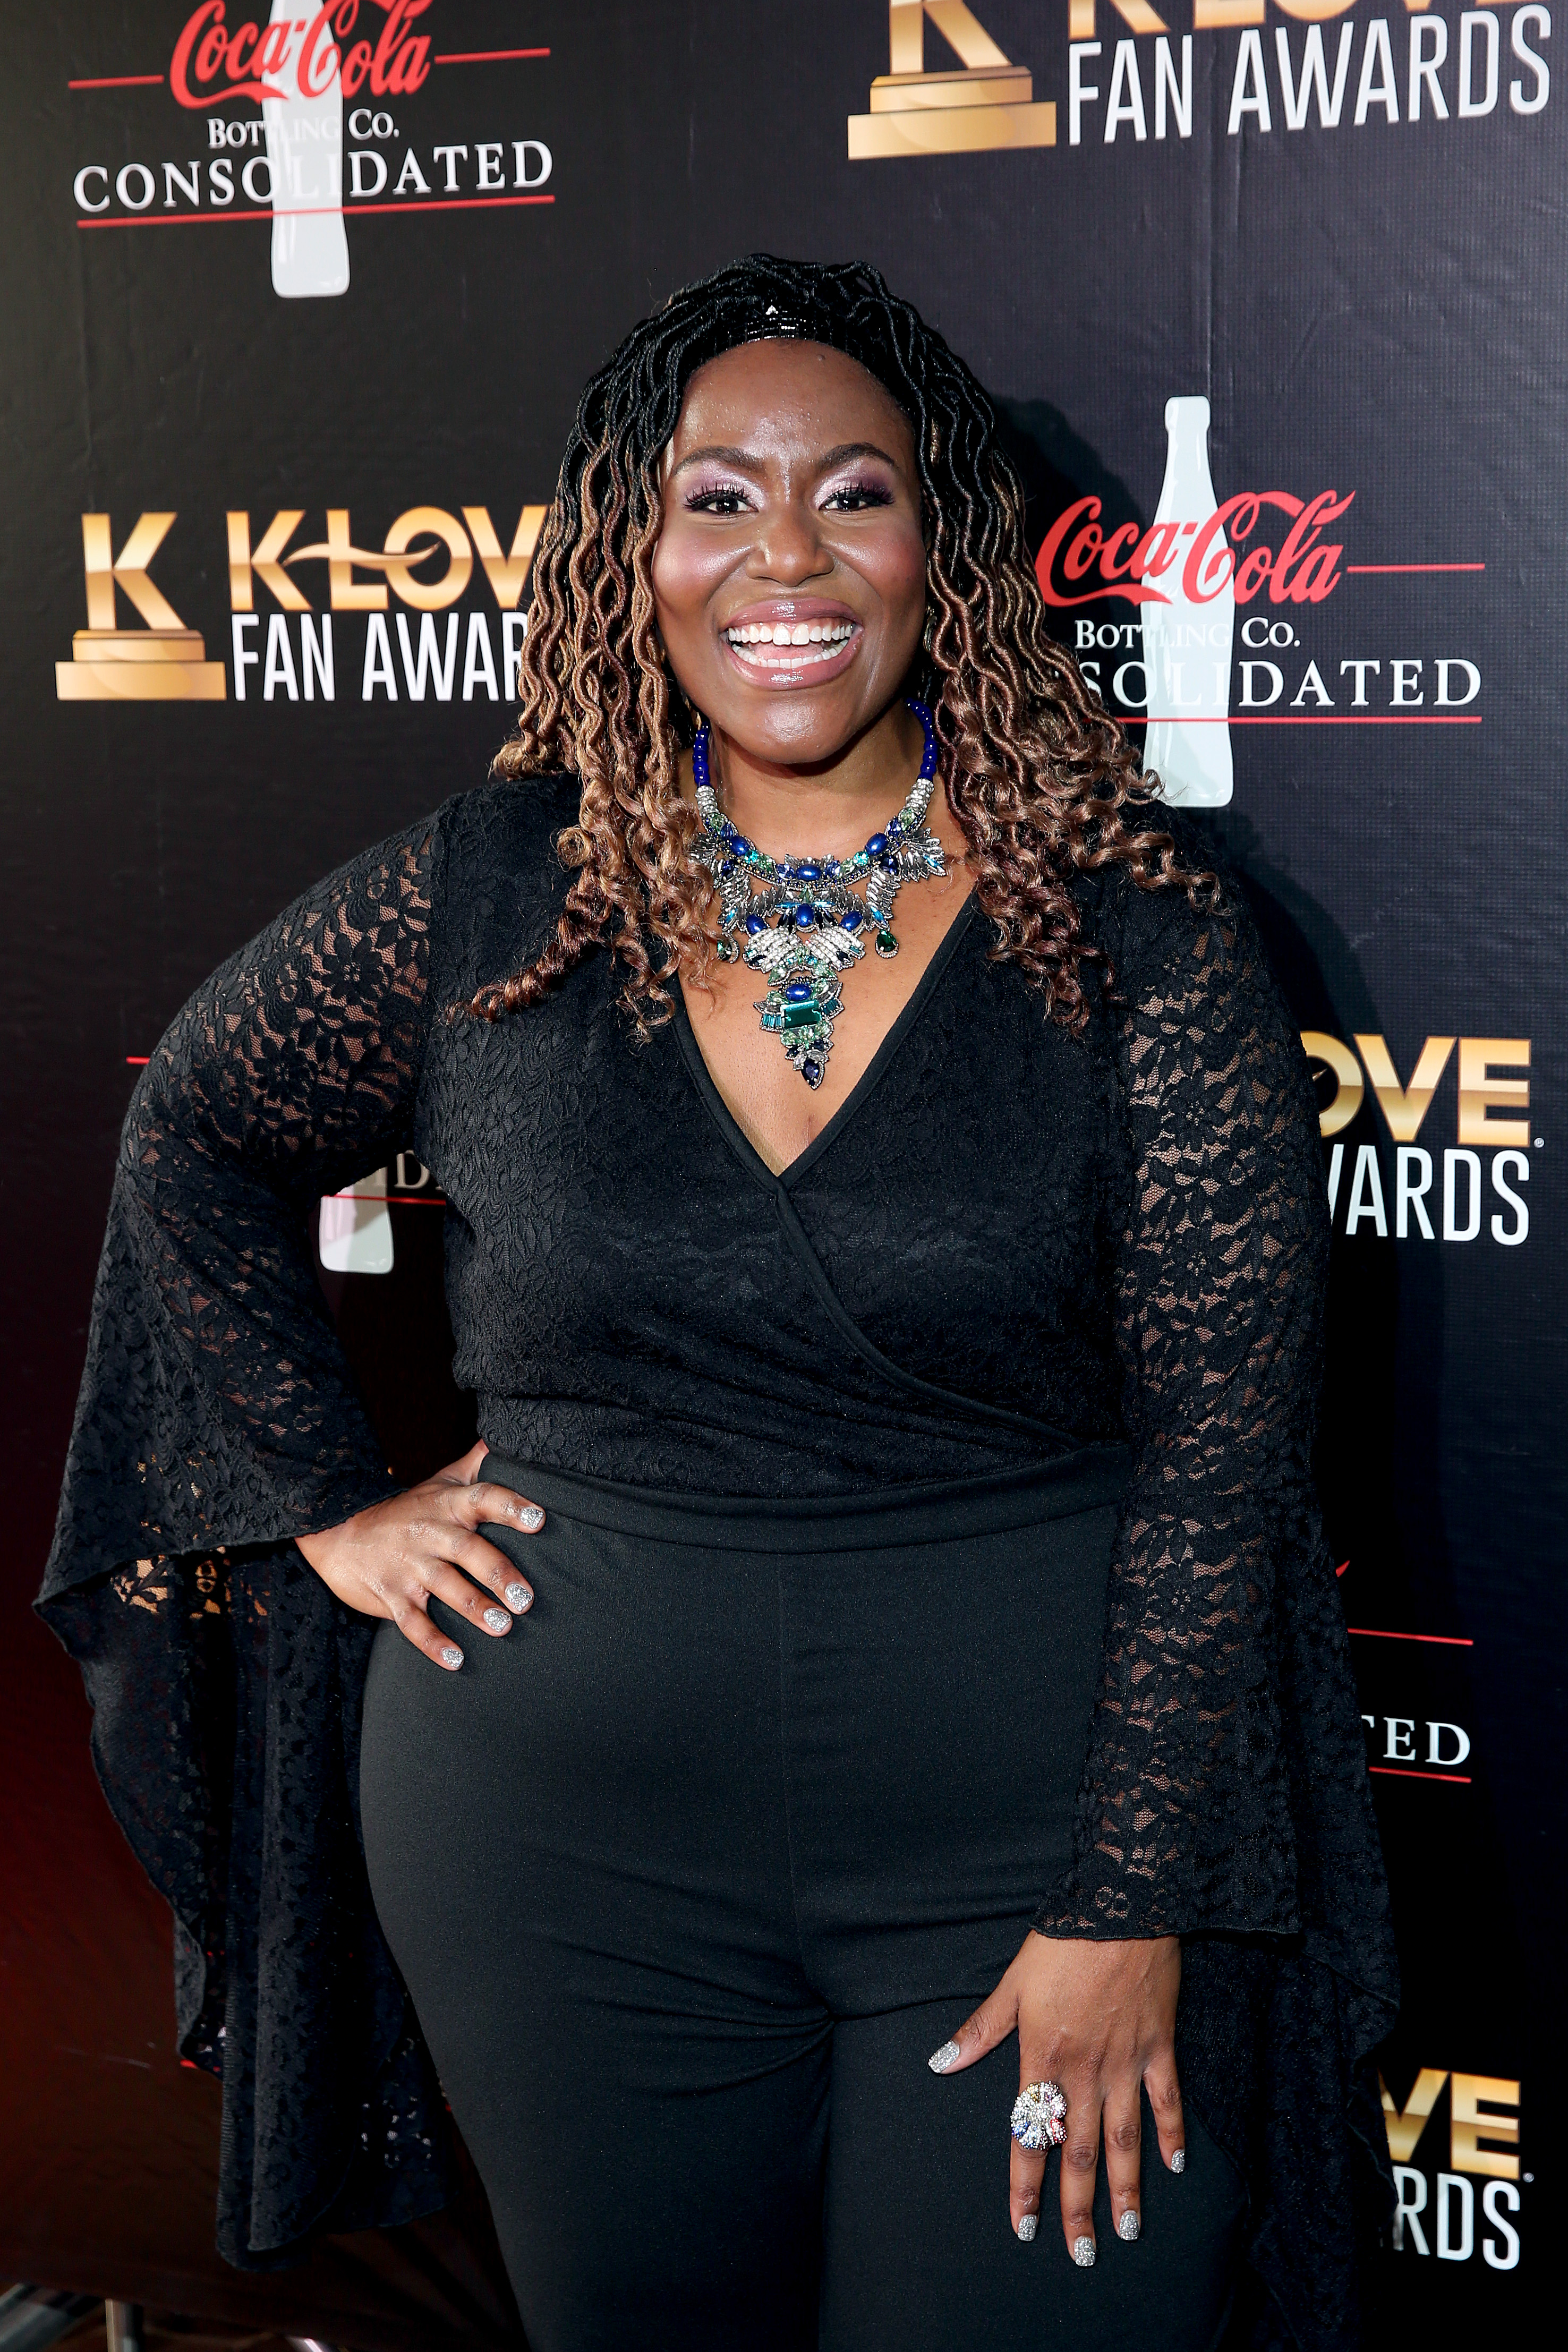 Mandisa at an event in Nashville, Tennessee on June 2, 2019 | Source: Getty Images